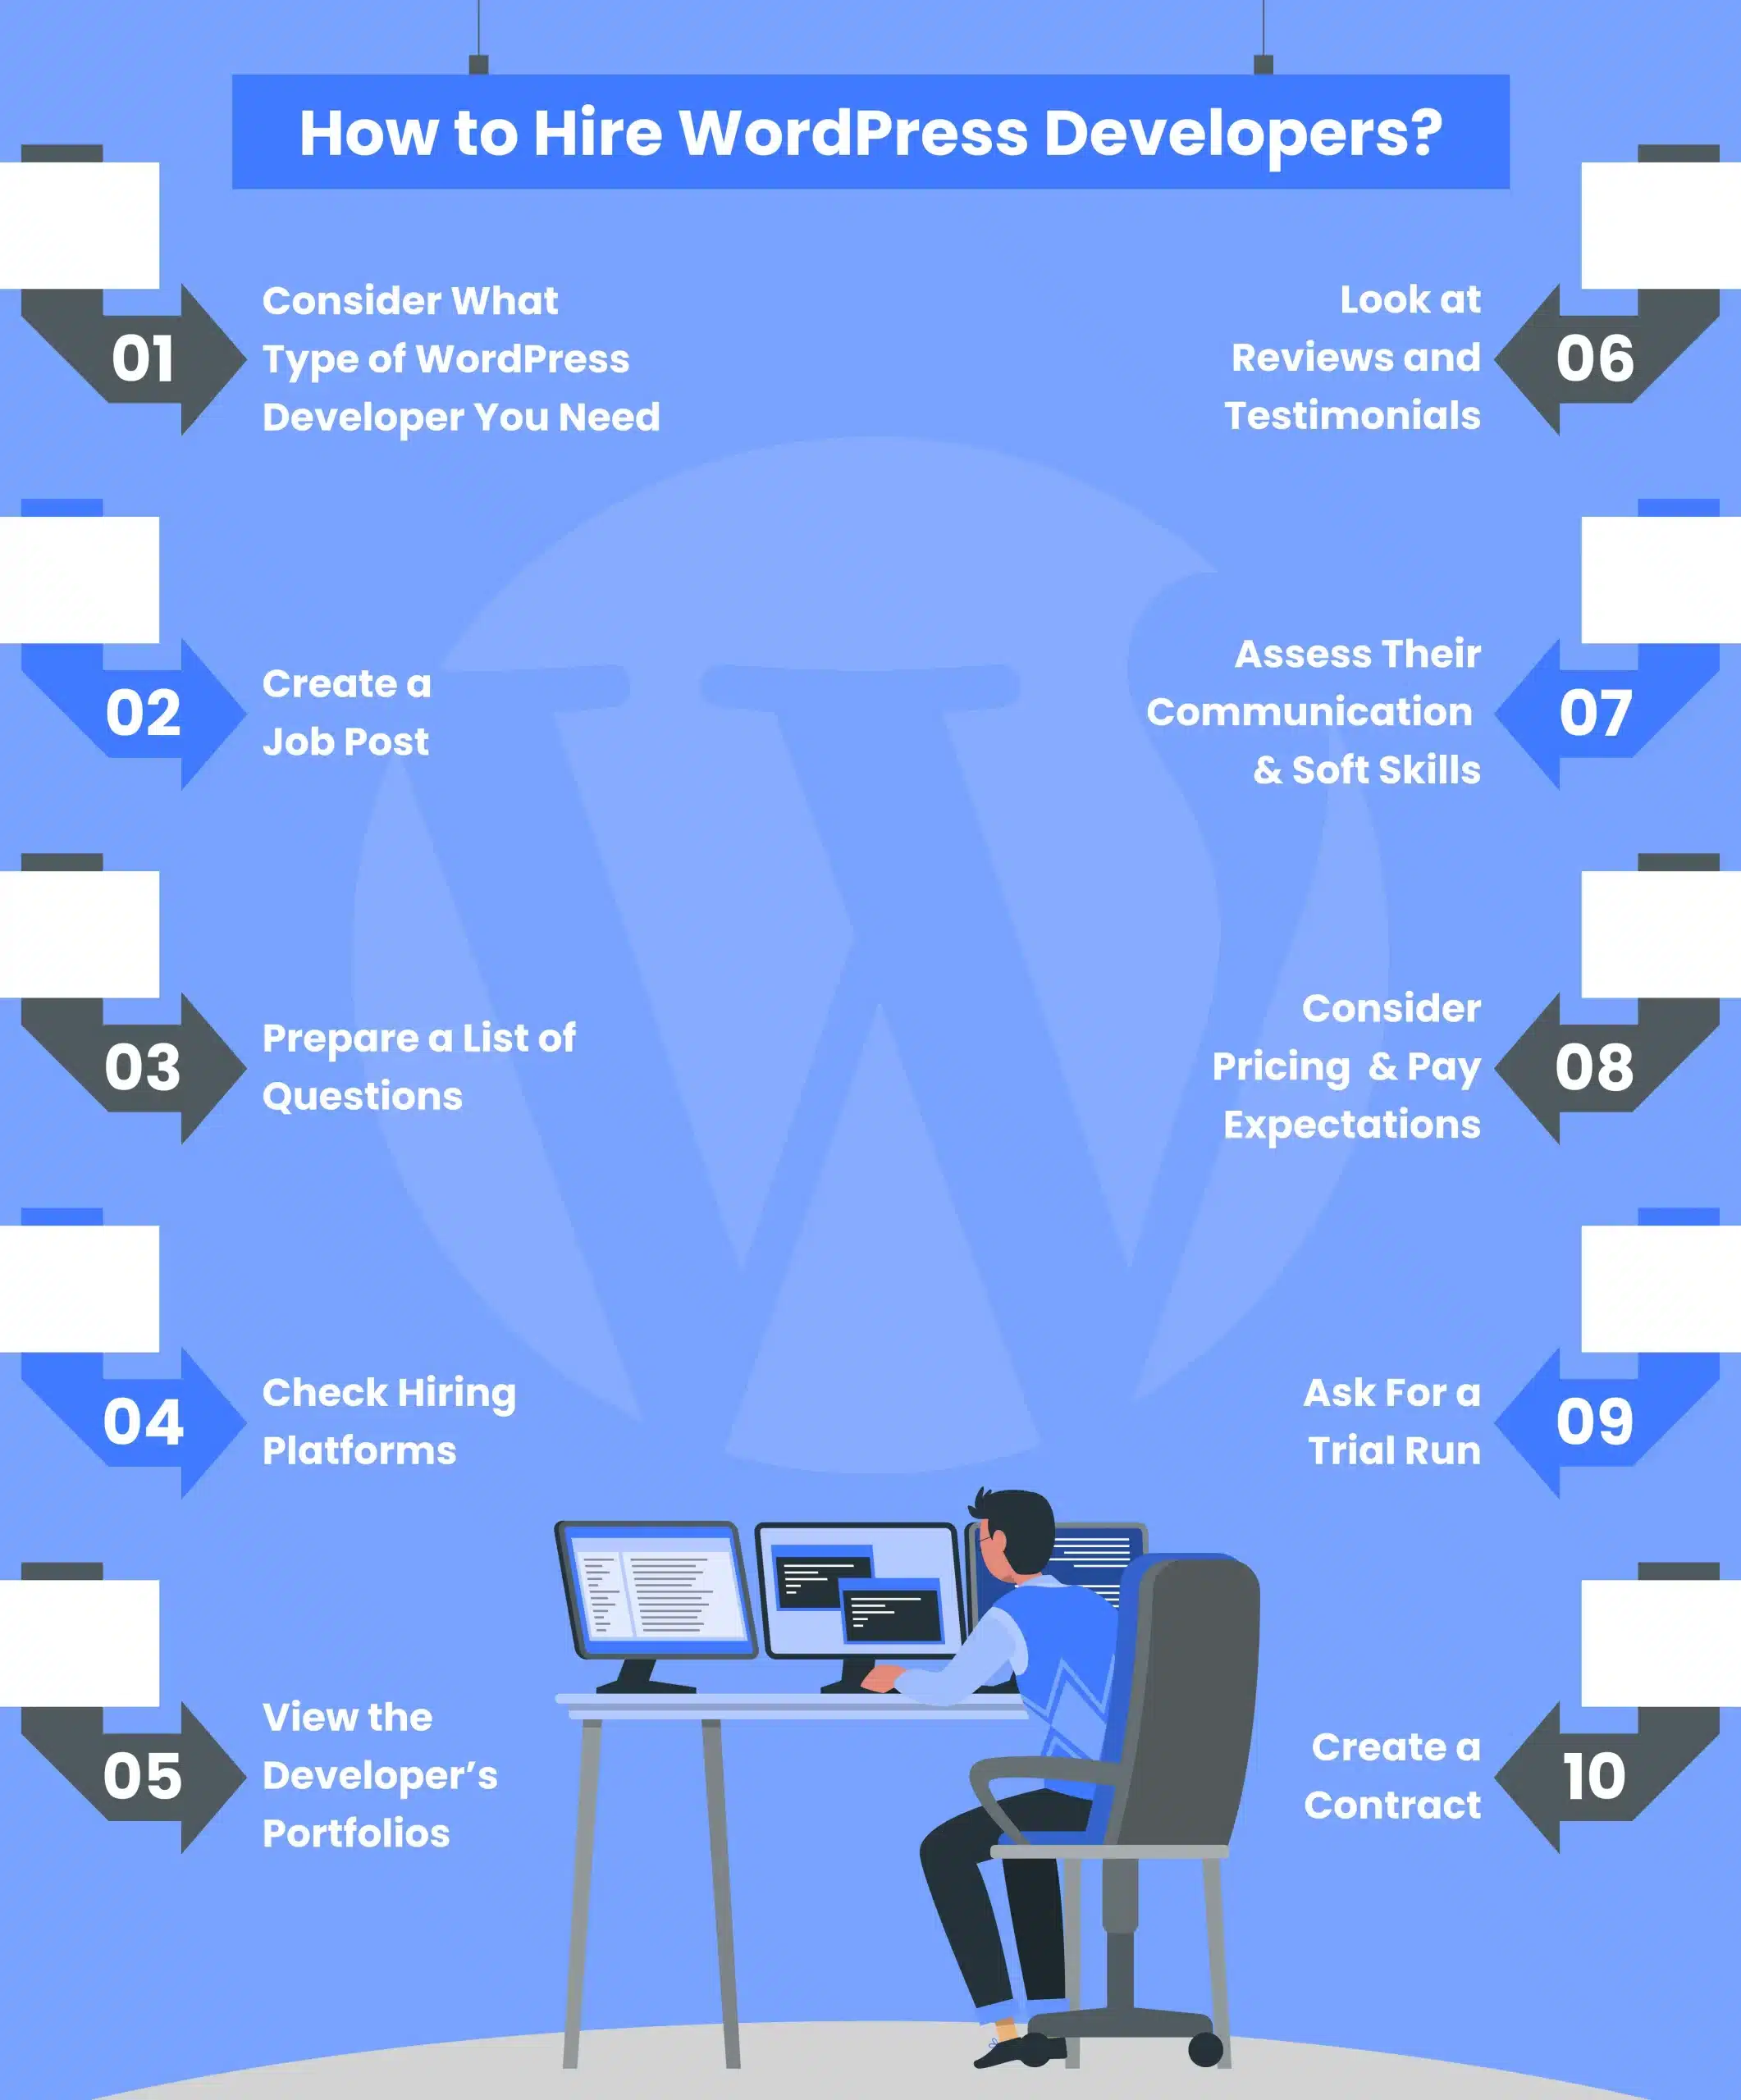 How to Hire WordPress Developers